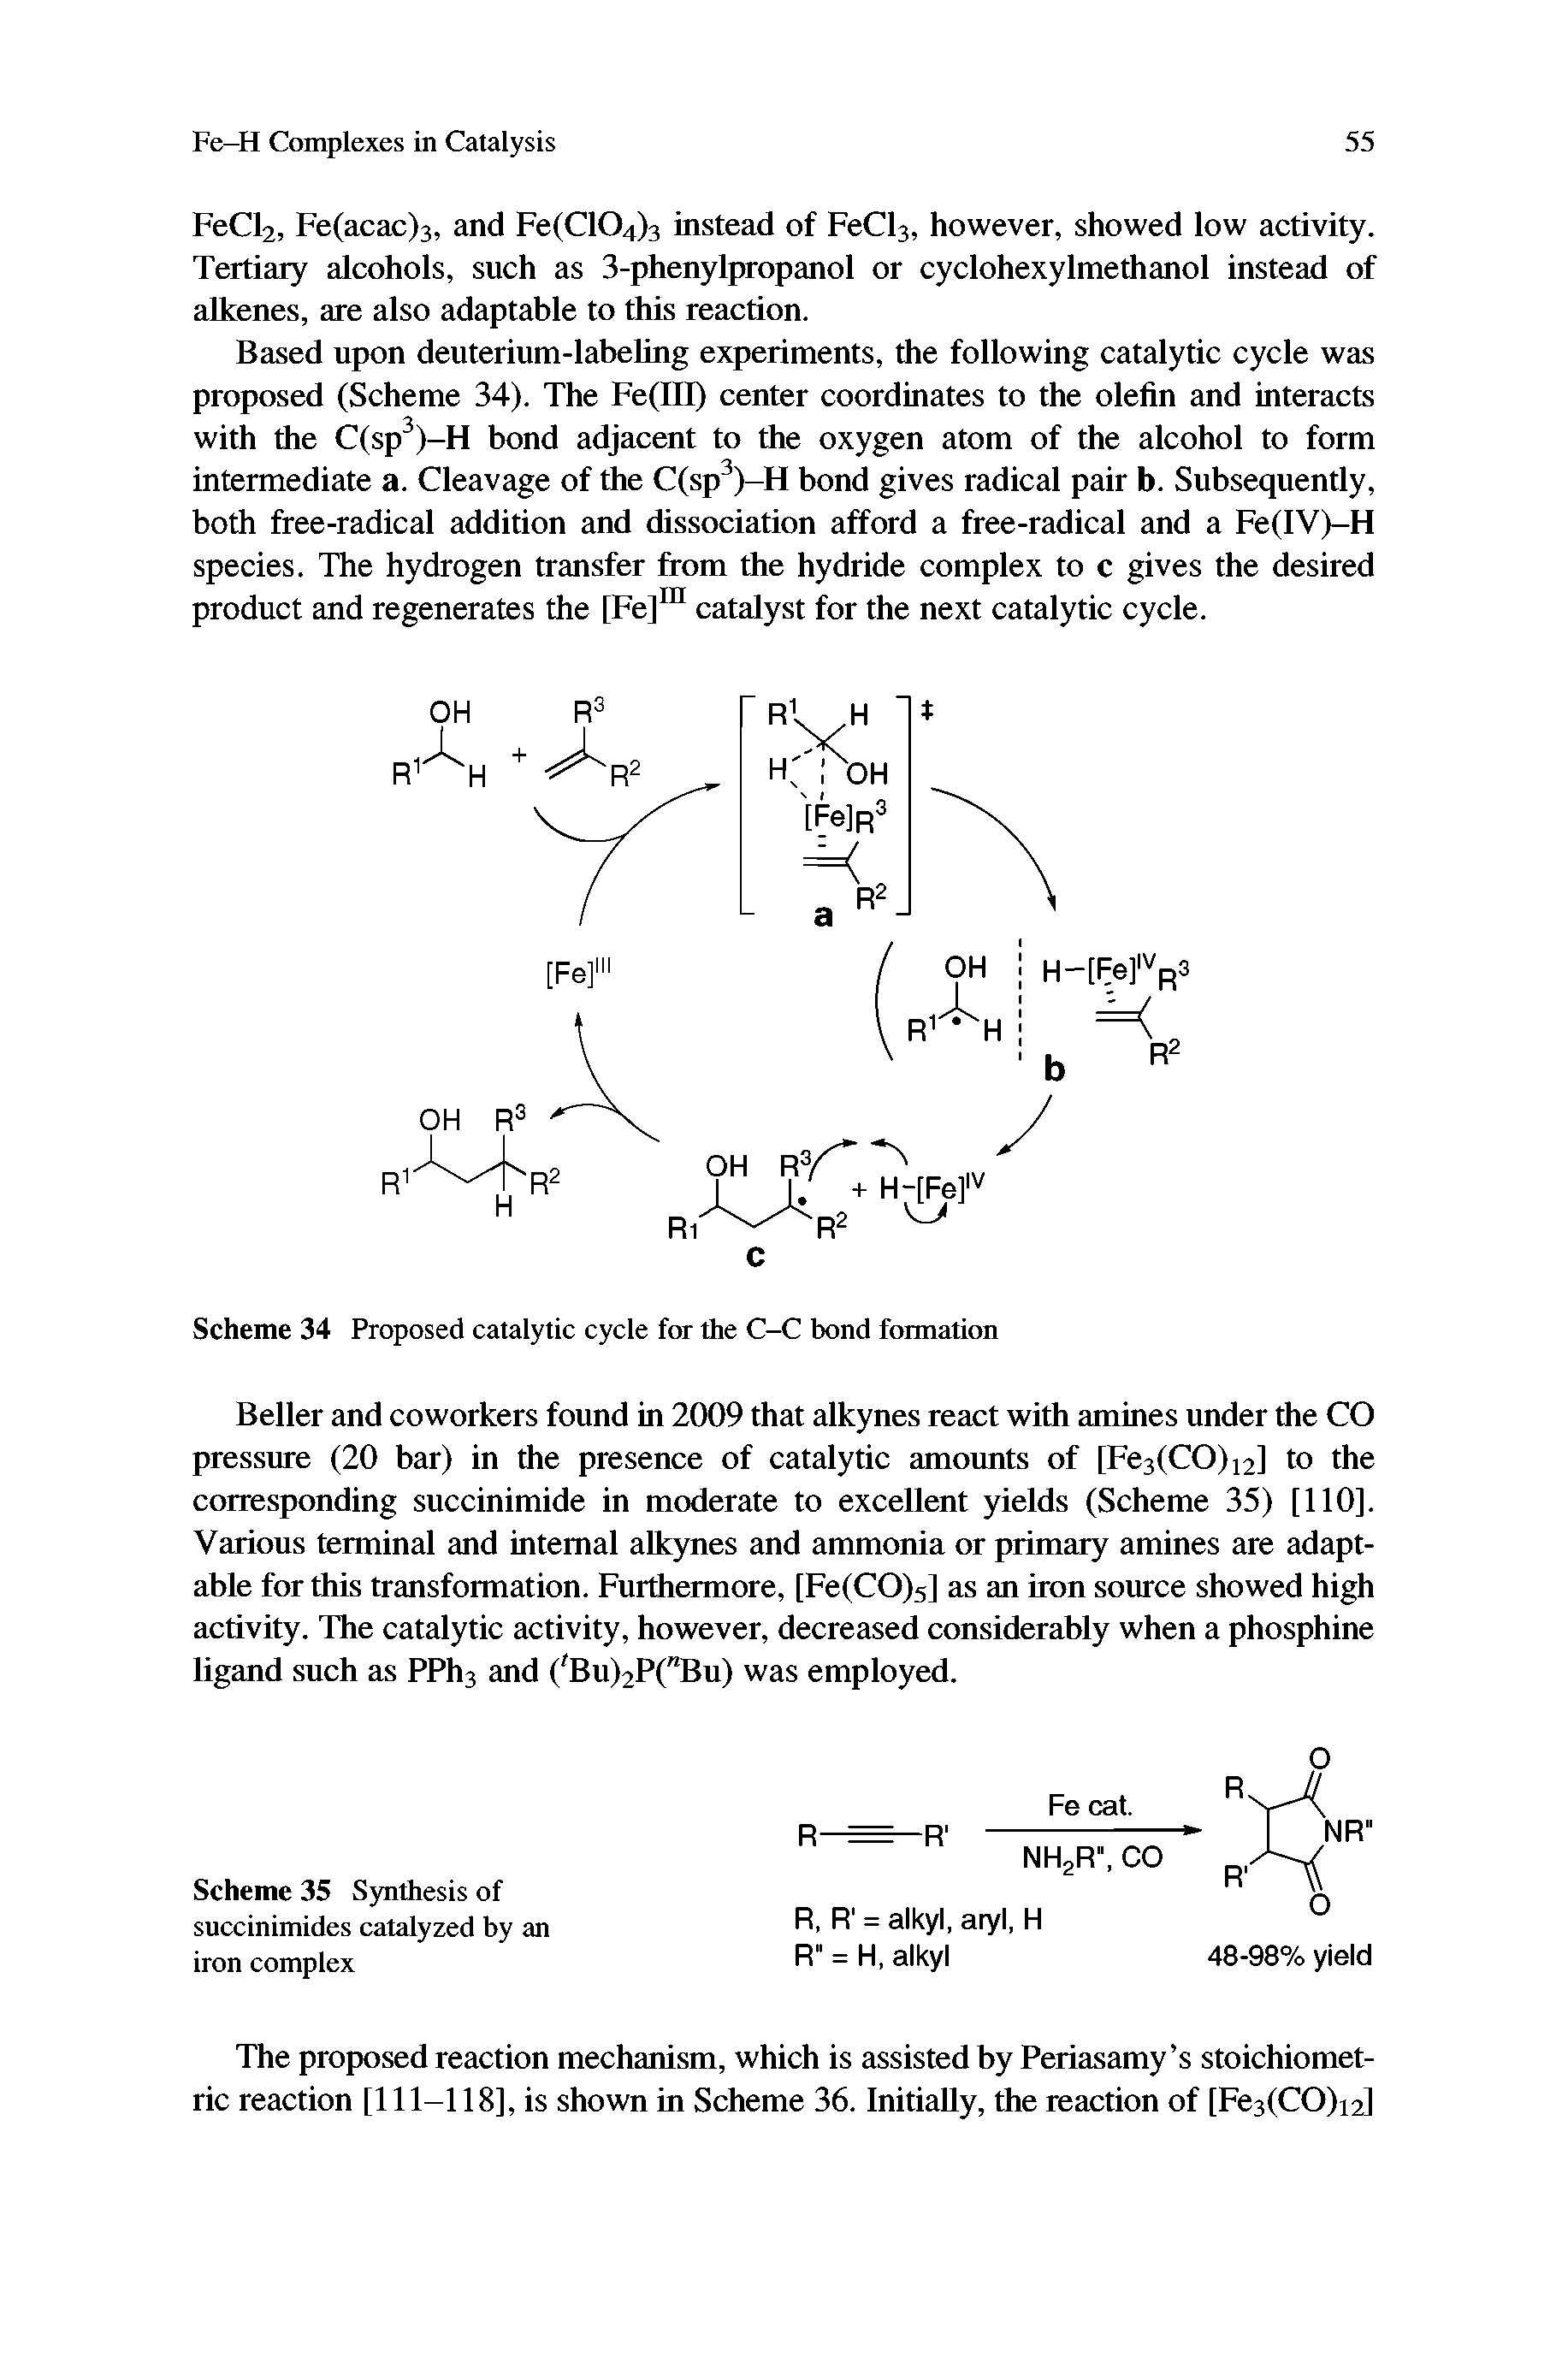 Scheme 34 Proposed catalytic cycle for the C-C bond formation...